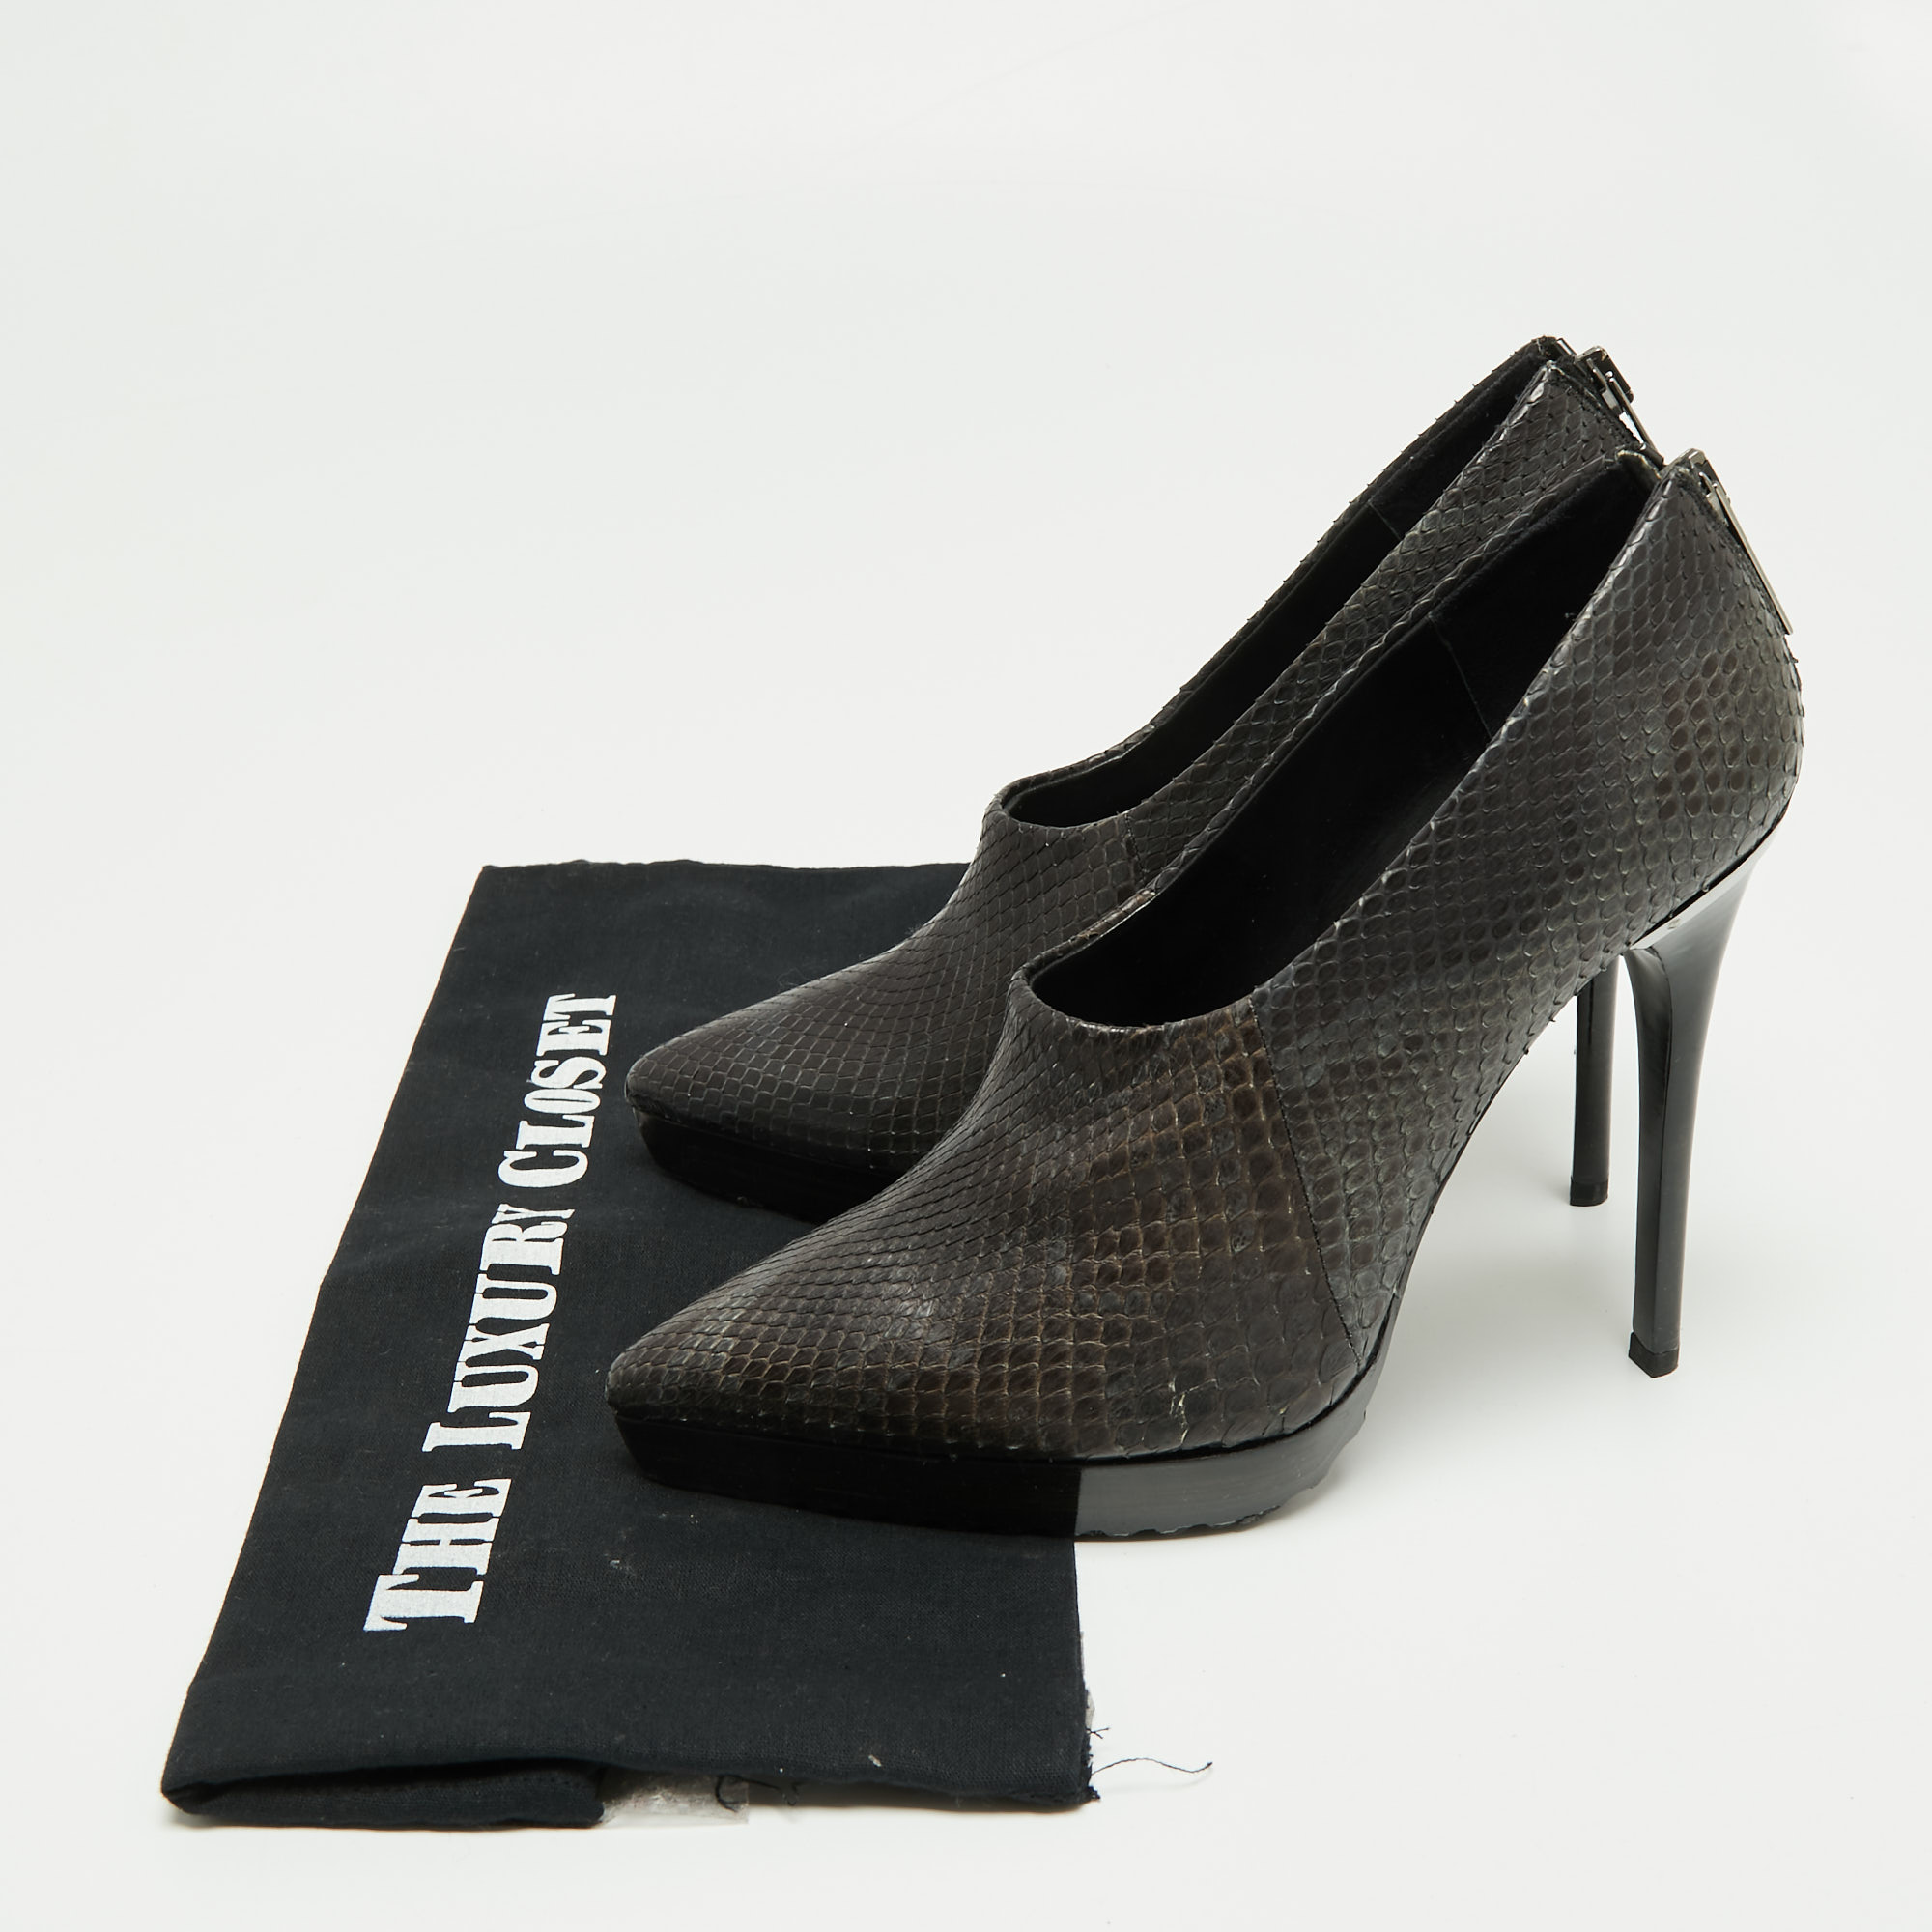 Burberry Black/Grey Python Leather Booties Size 38